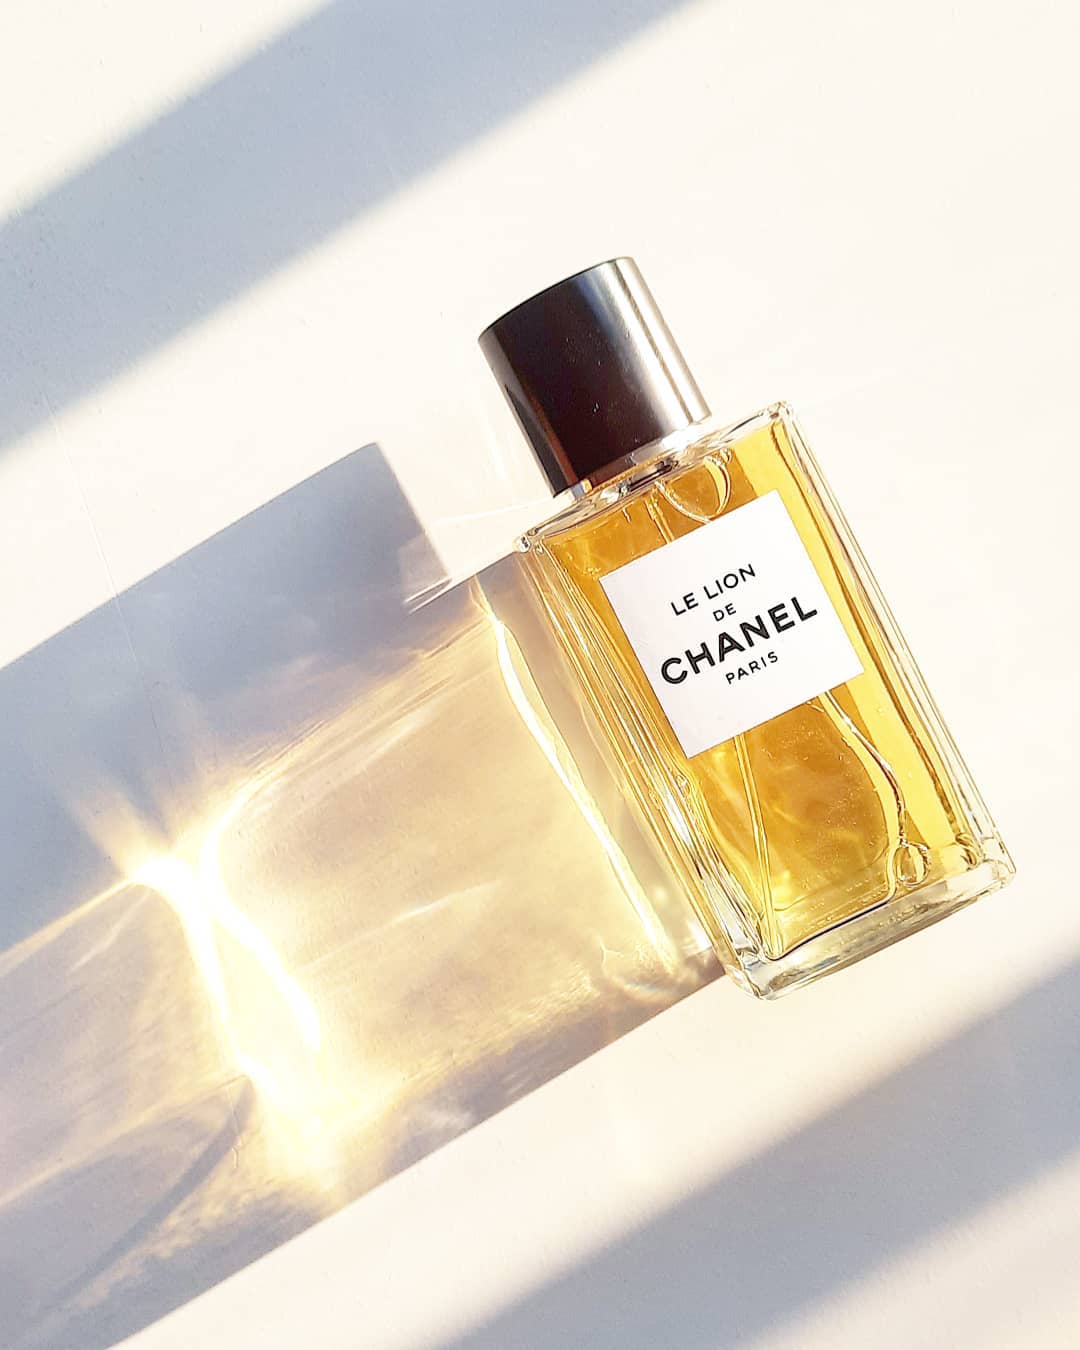 Why The Leos In Your Life Are Sure To Love Chanel's Newest Fragrance